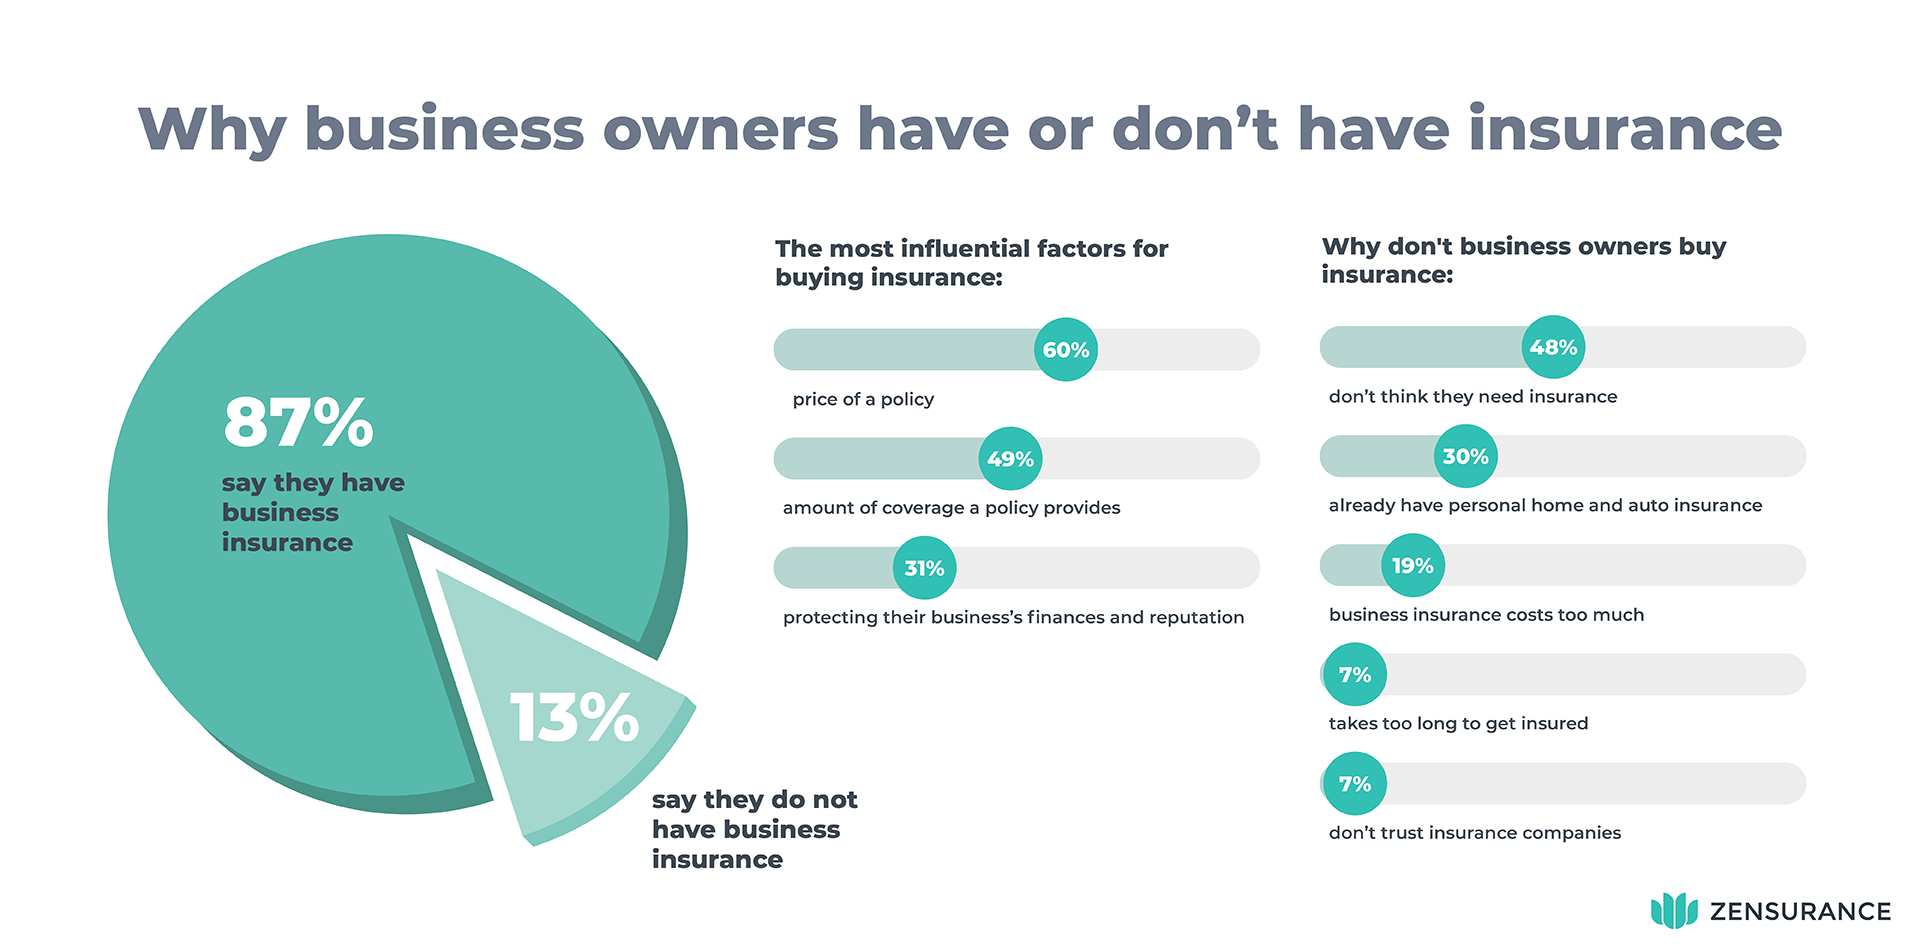 Why business owners have or don't have insurance